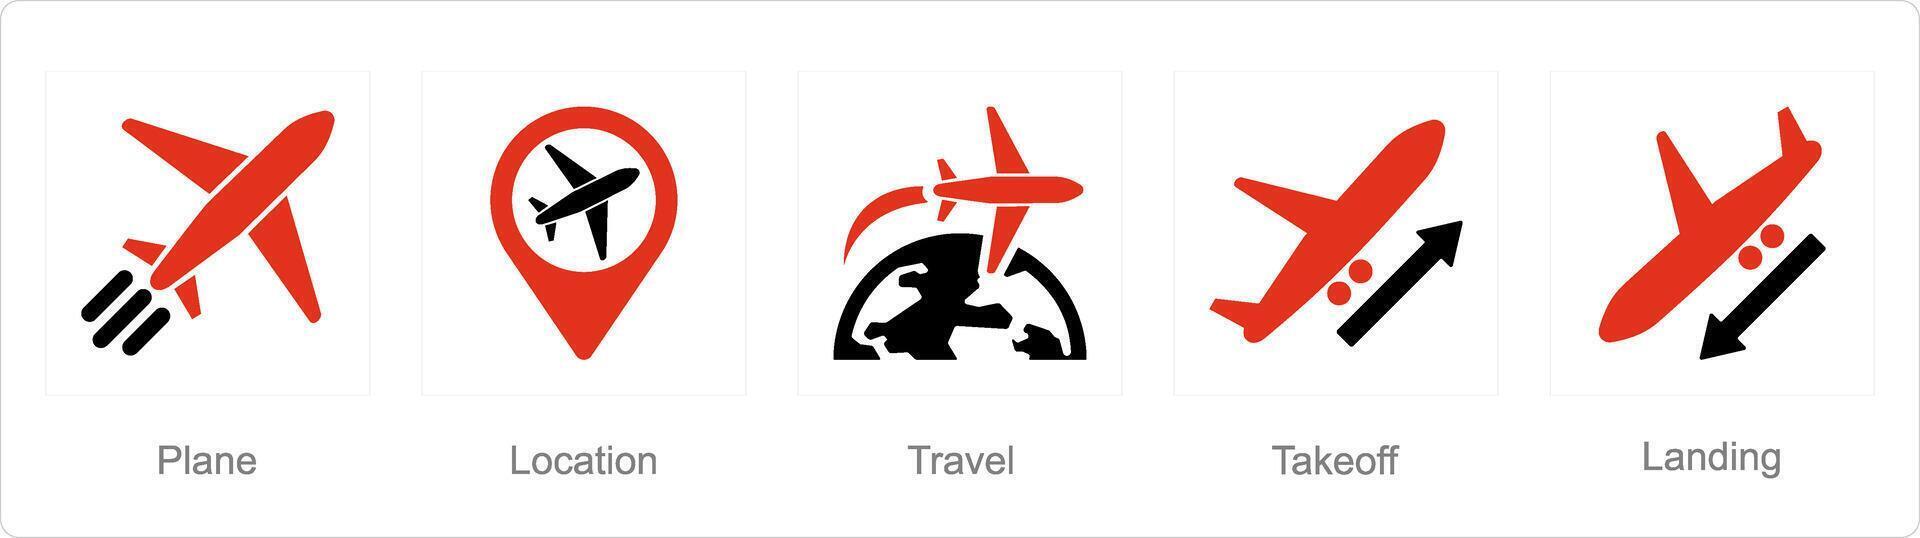 A set of 5 Airport icons as plane, location, travel vector